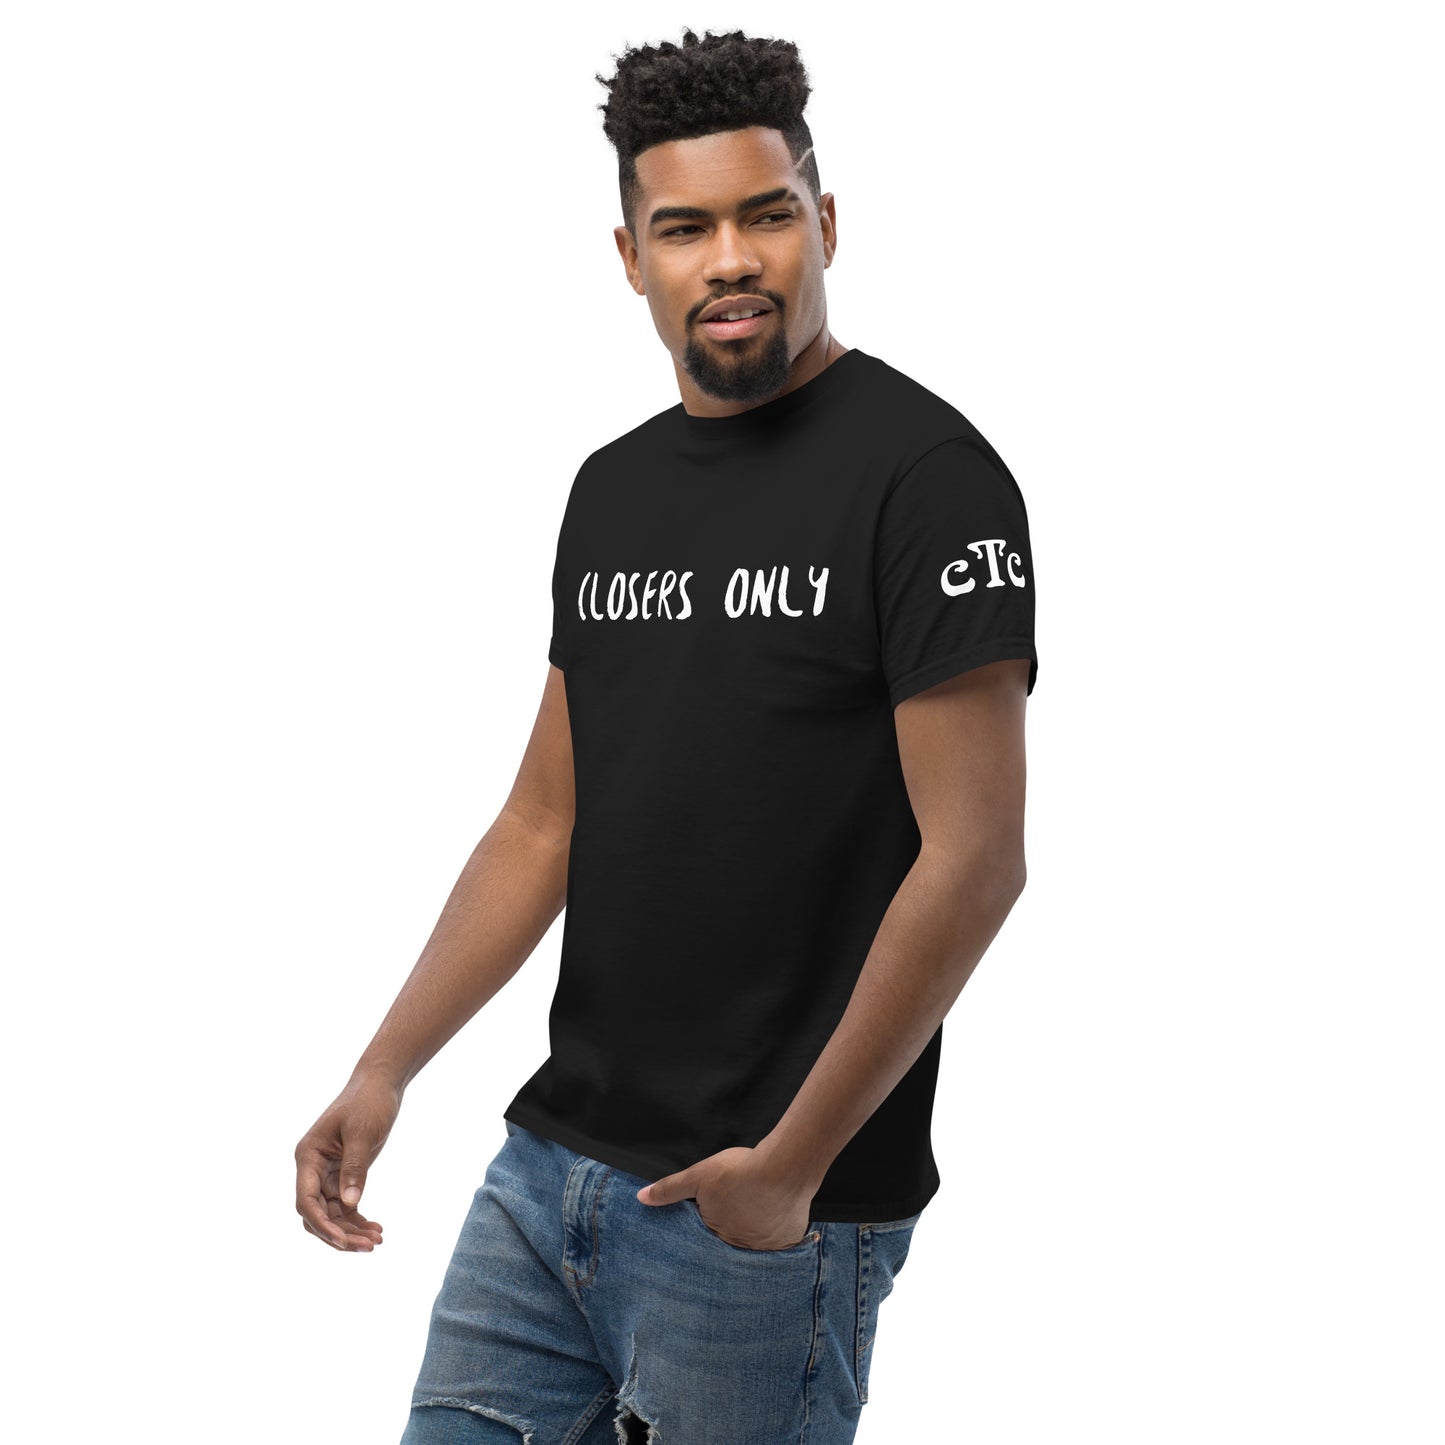 Closers Only Tee